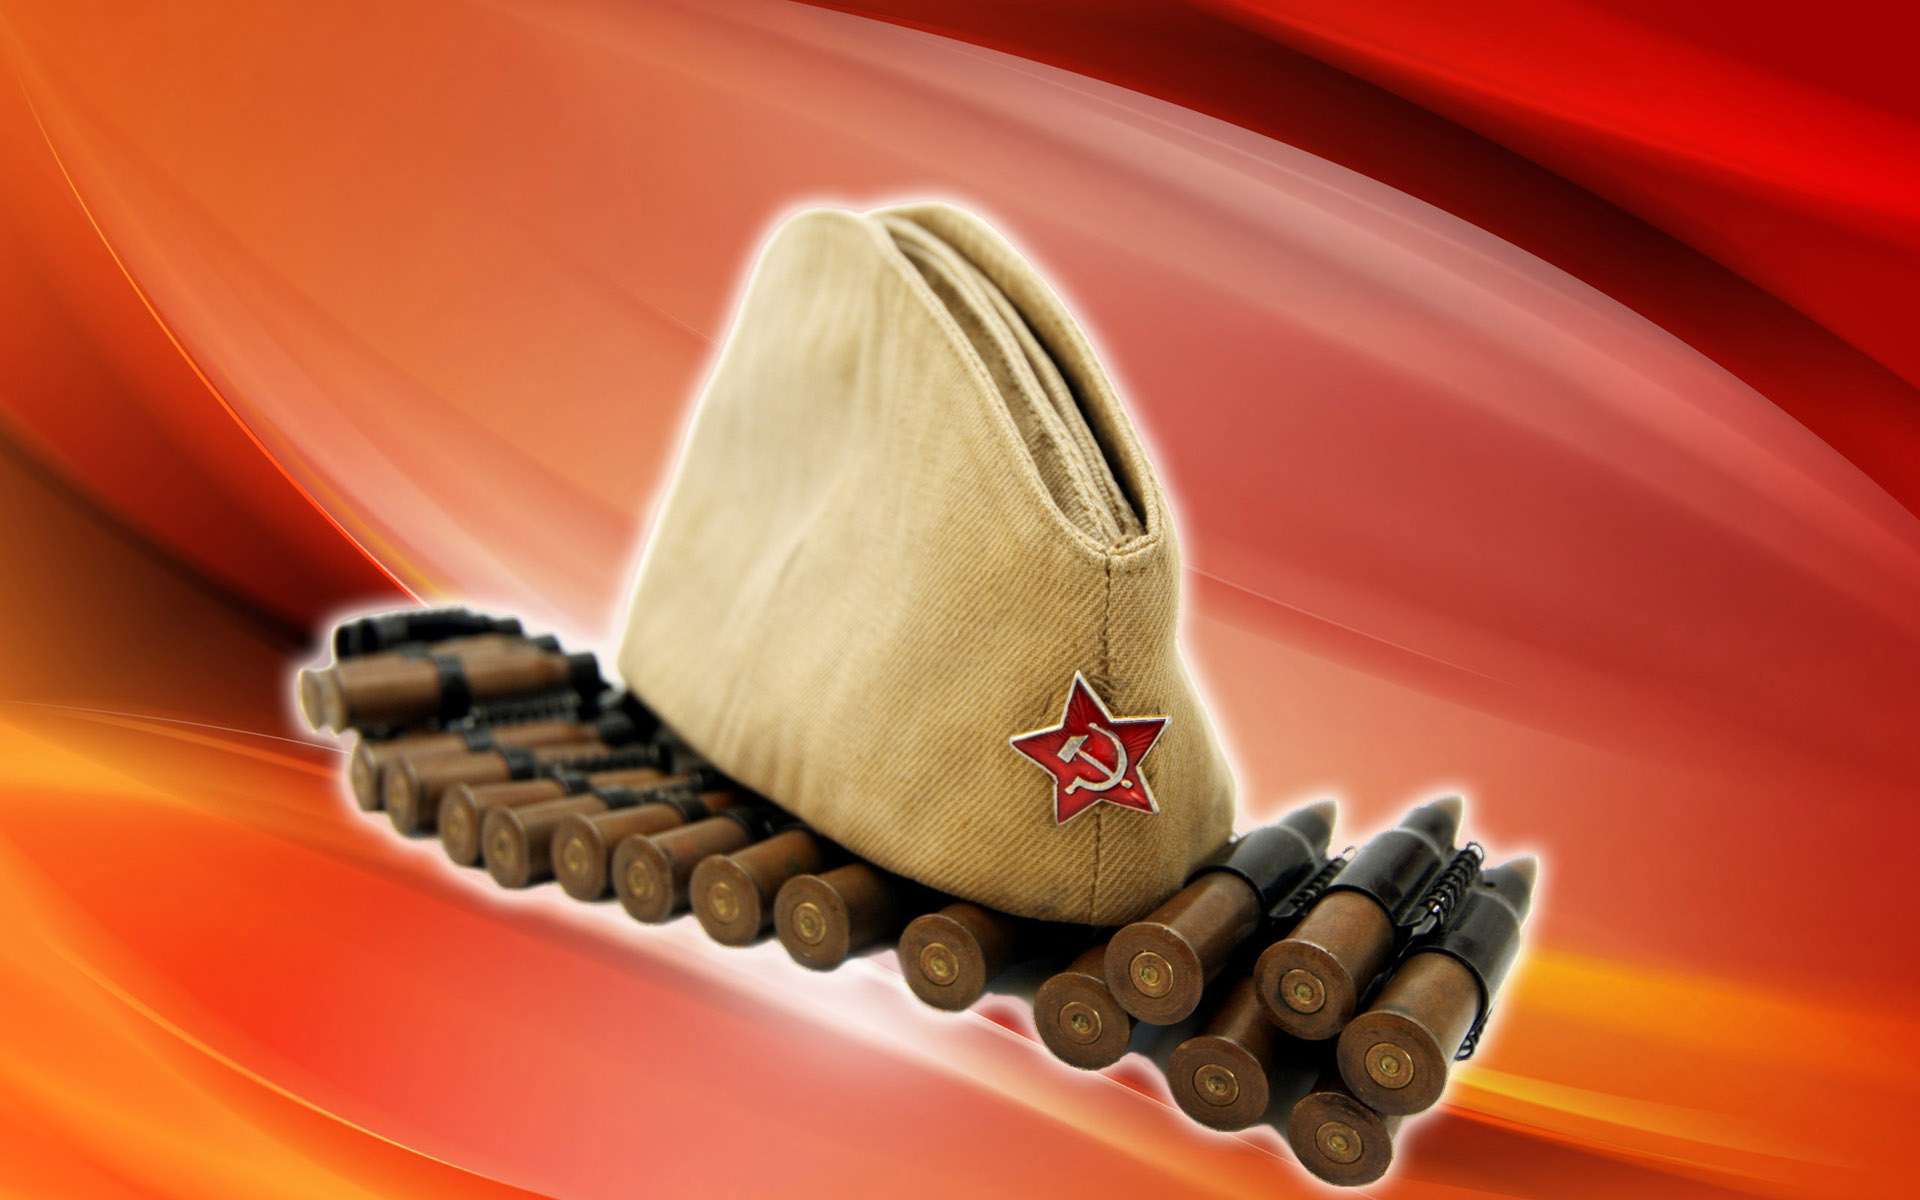 http://www.zastavki.com/pictures/originals/2014/Holidays___May_9_Forage_cap_and_ammunition_in_the_May_9_Victory_Day_078771_.jpg